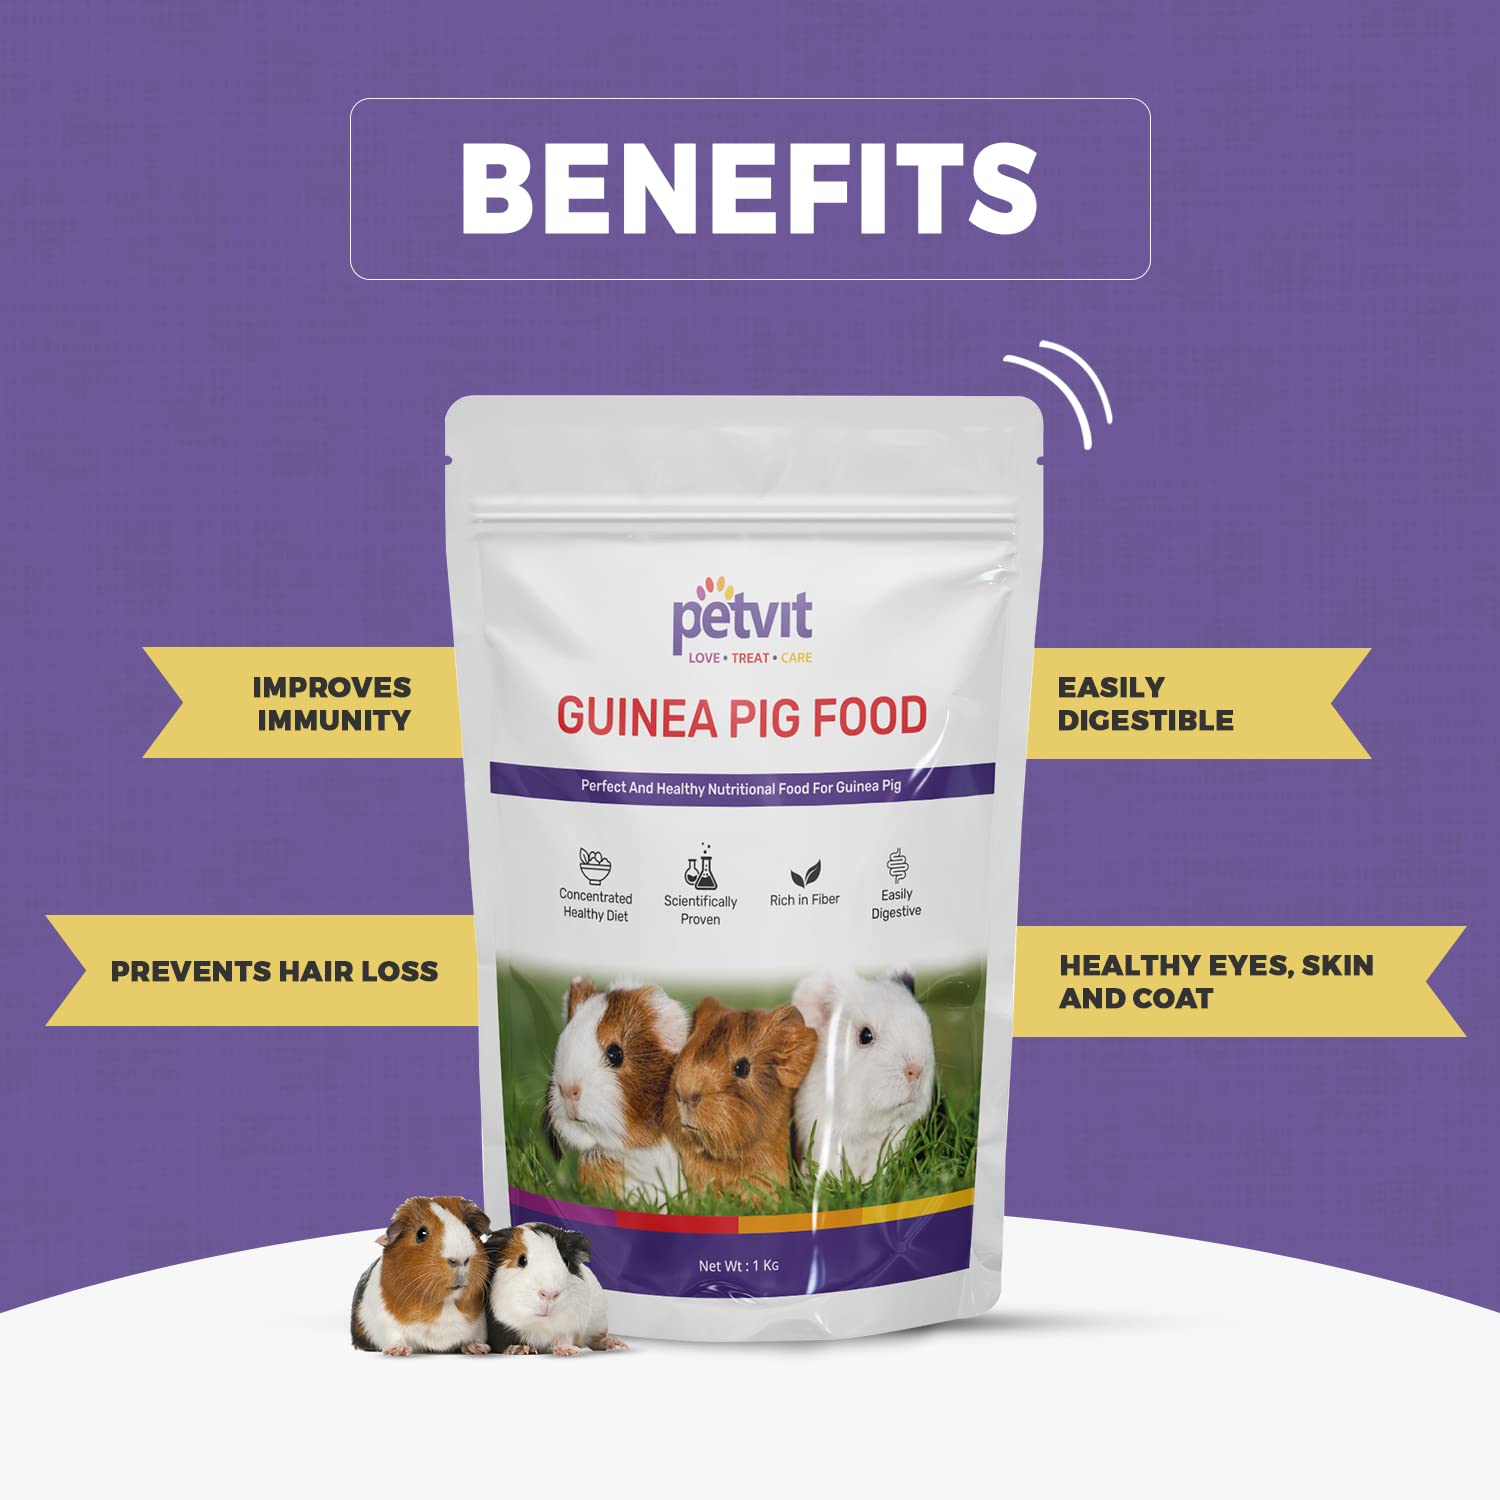 Petvit Guinea Pig Food with Corn Meal | Wheat | Alfalfa Meal | Roasted Gram | Antioxidant | Hay Grass | Milk | SOYA Bean | Vitamins & Minerals | Highly Nutritious Diet Essential -1kg